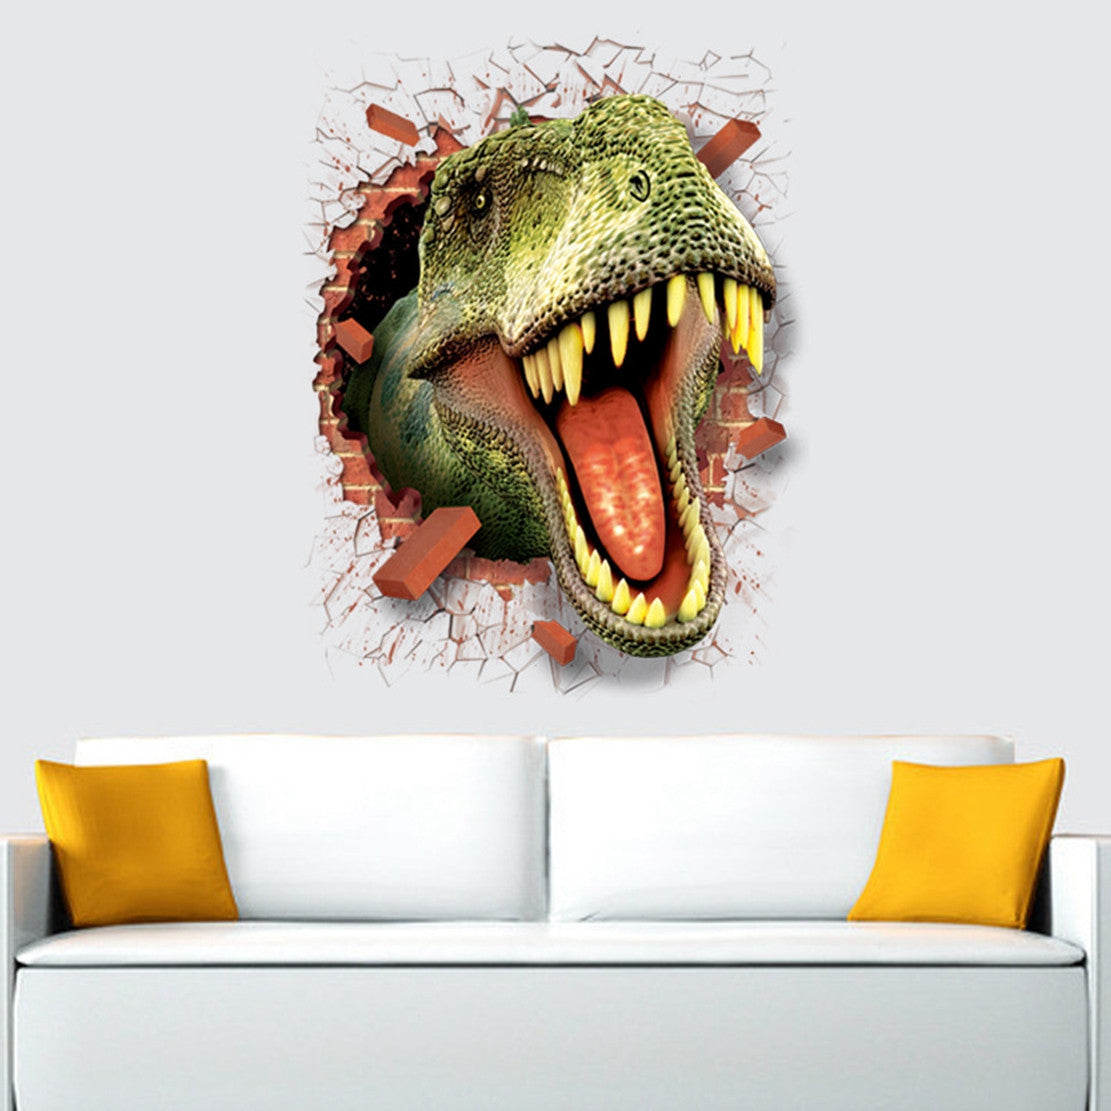 U-Shark® 3D Self-Adhesive Removable Green Sharp Dinosaur Mouth Wall Decals Stickers Wallpapers Dino Decor Poster  20" Width by 28" Height